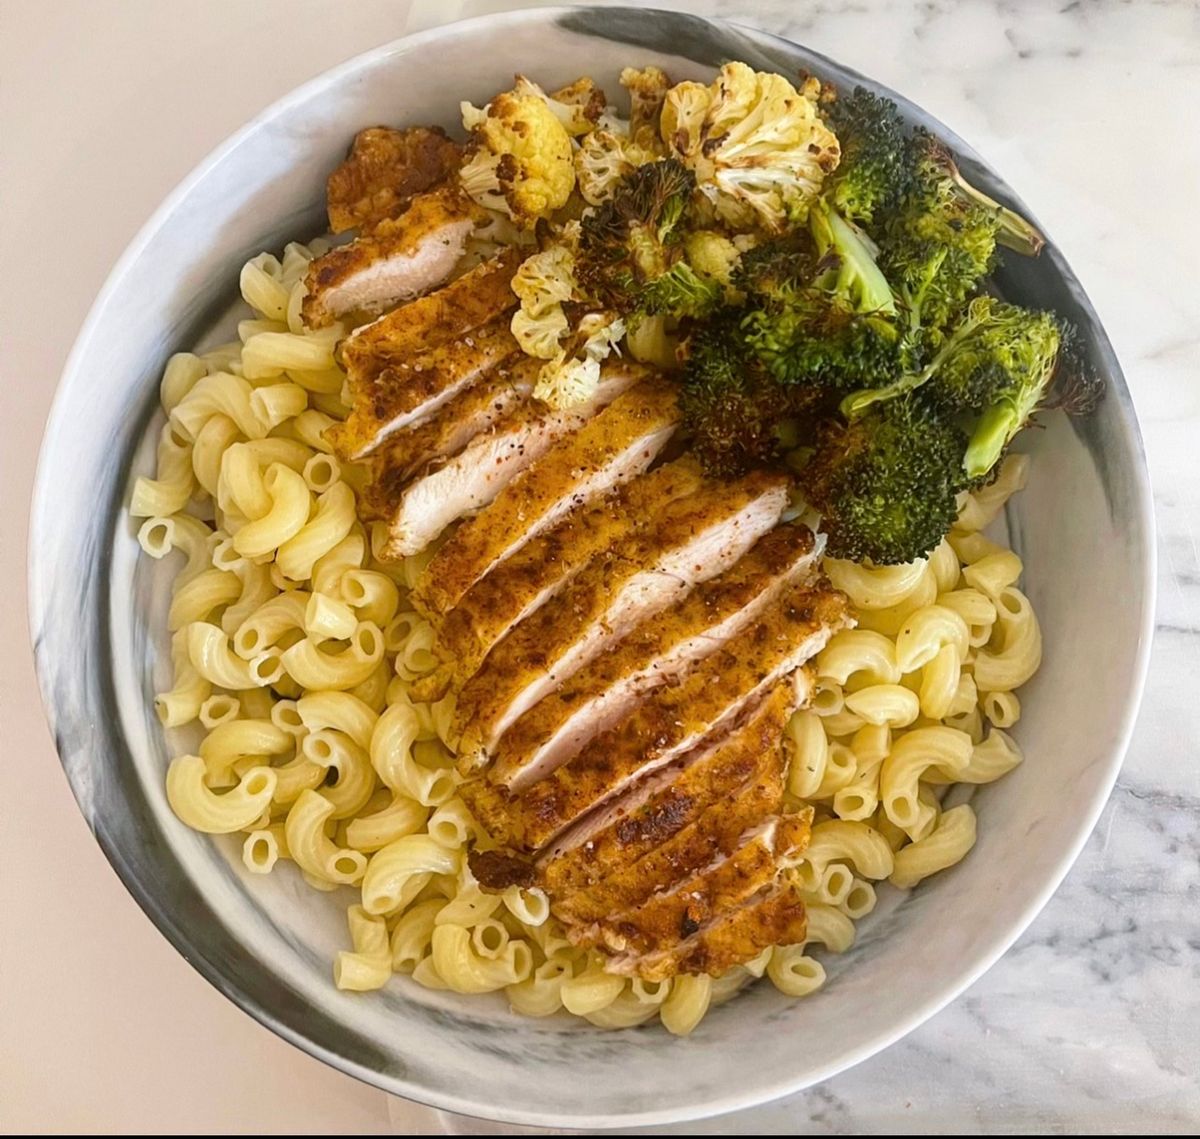 Close up image showing chicken on top of pasta with broccoli on the side